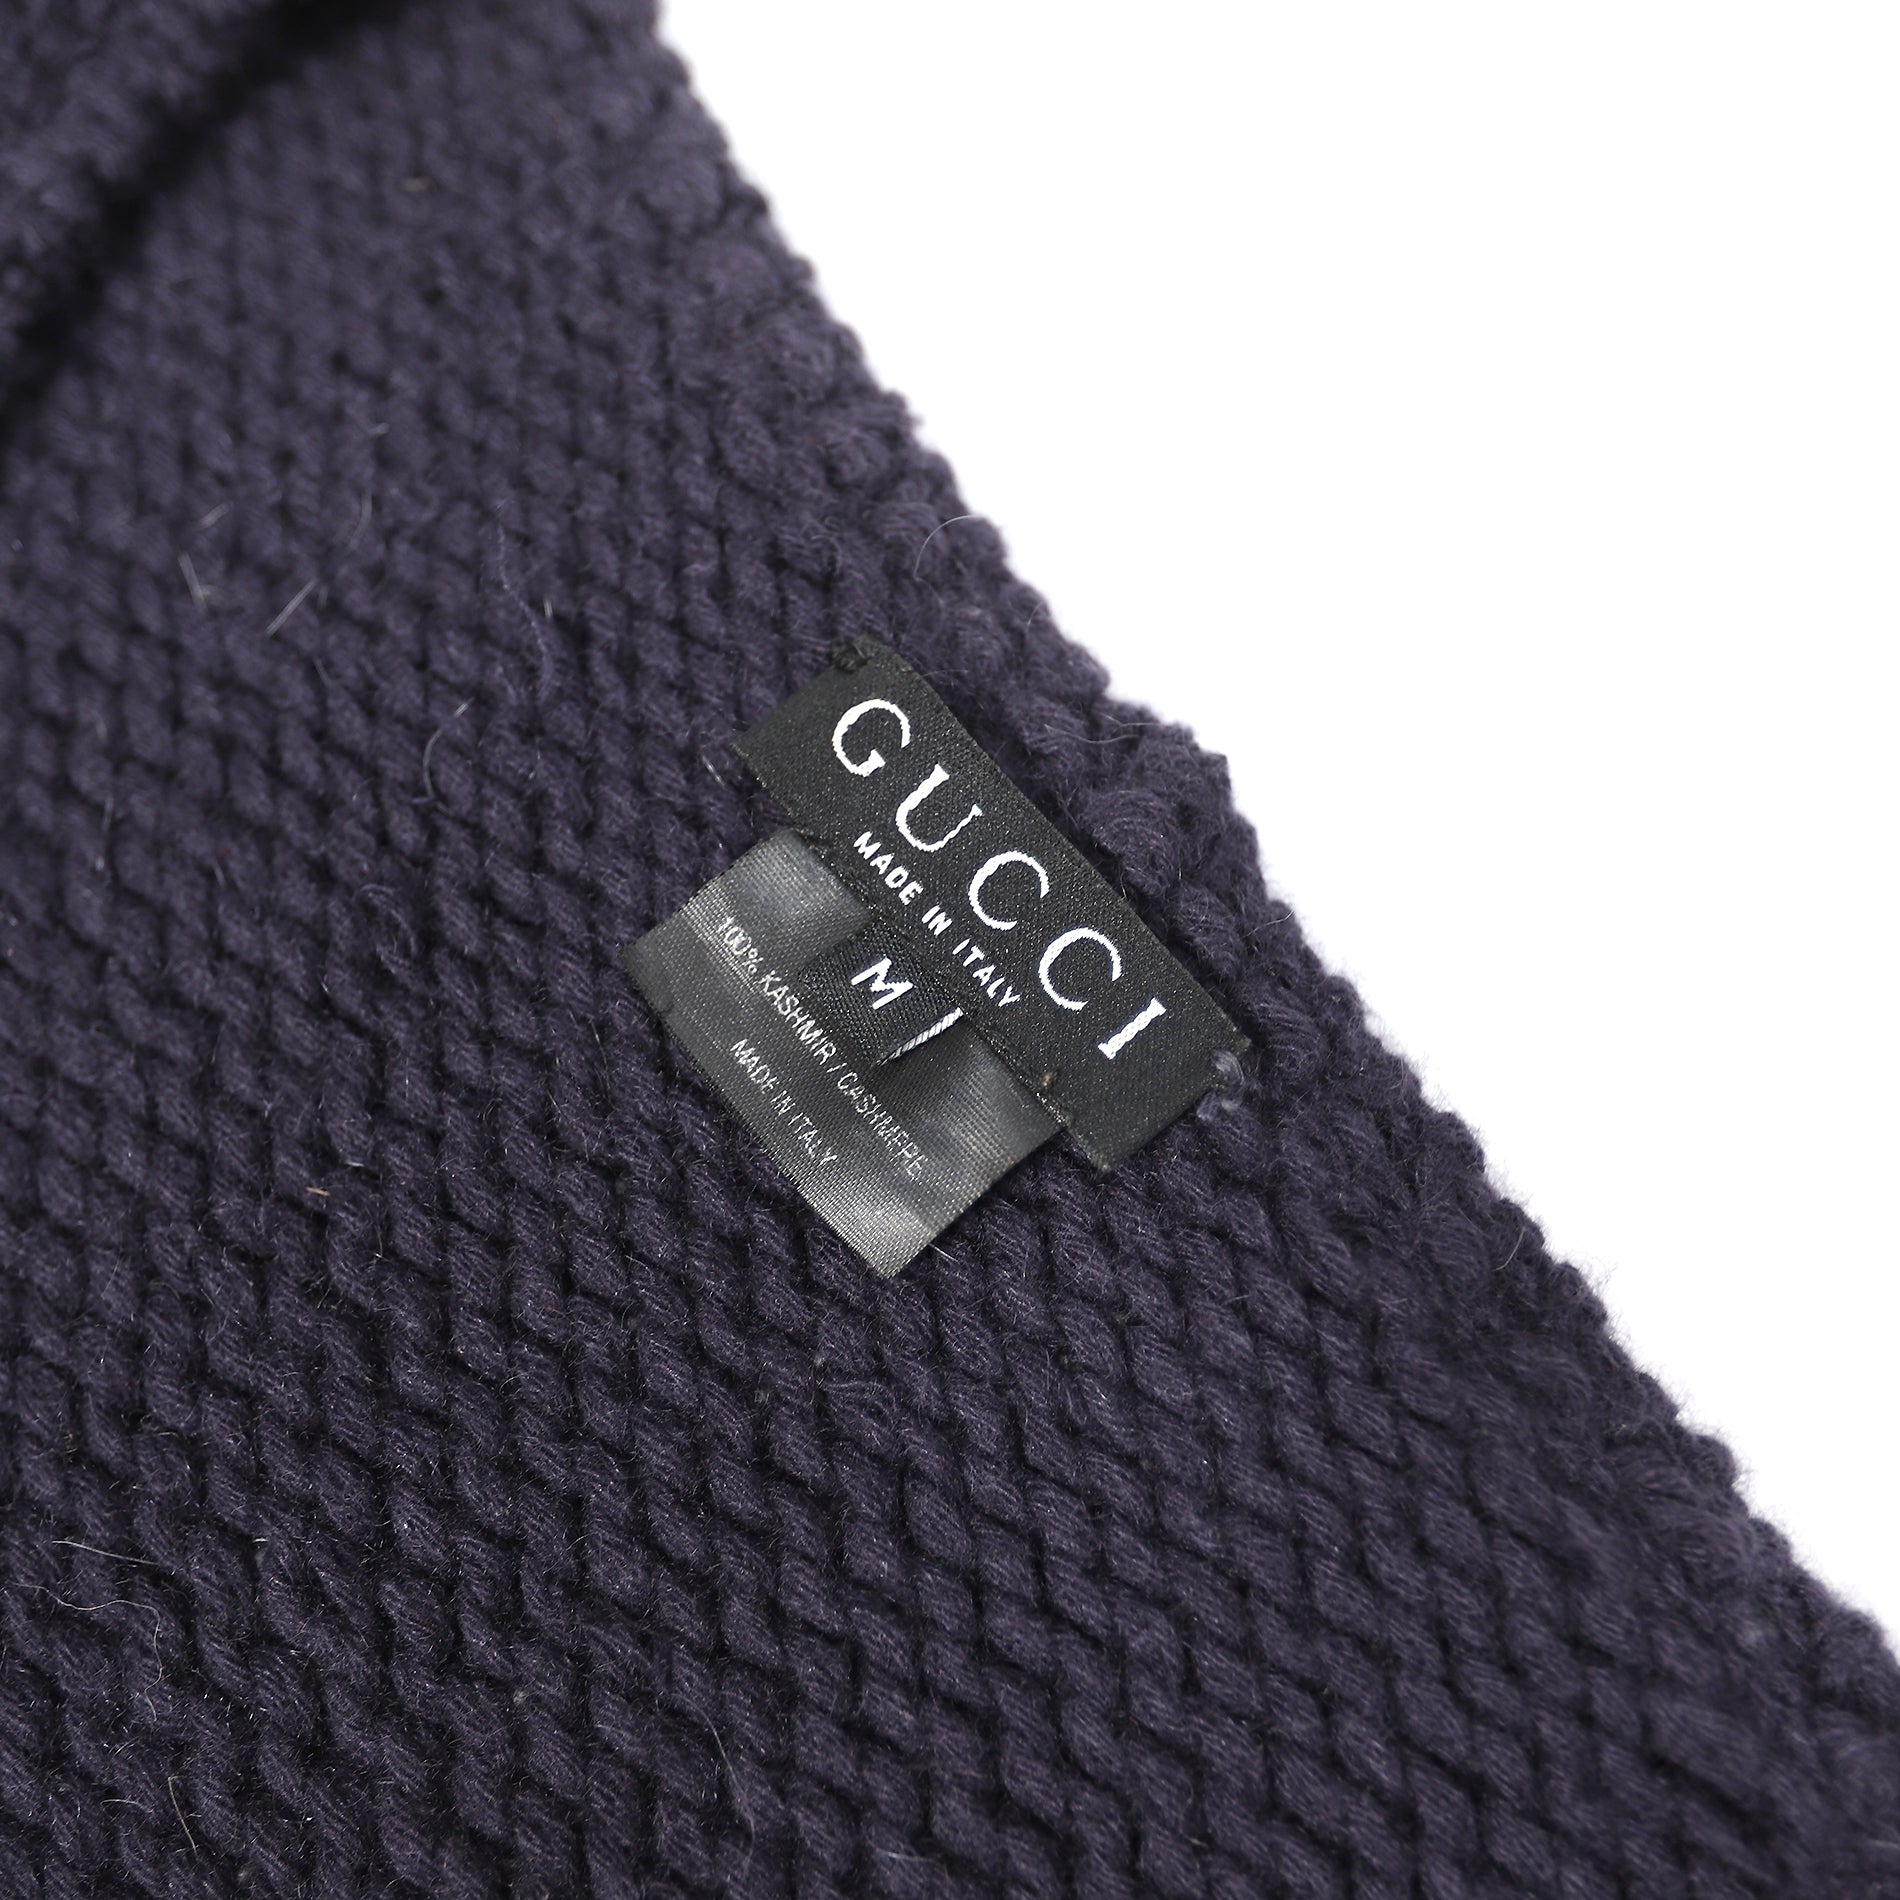 Gucci by Tom Ford V-Neck Cashmere Knit